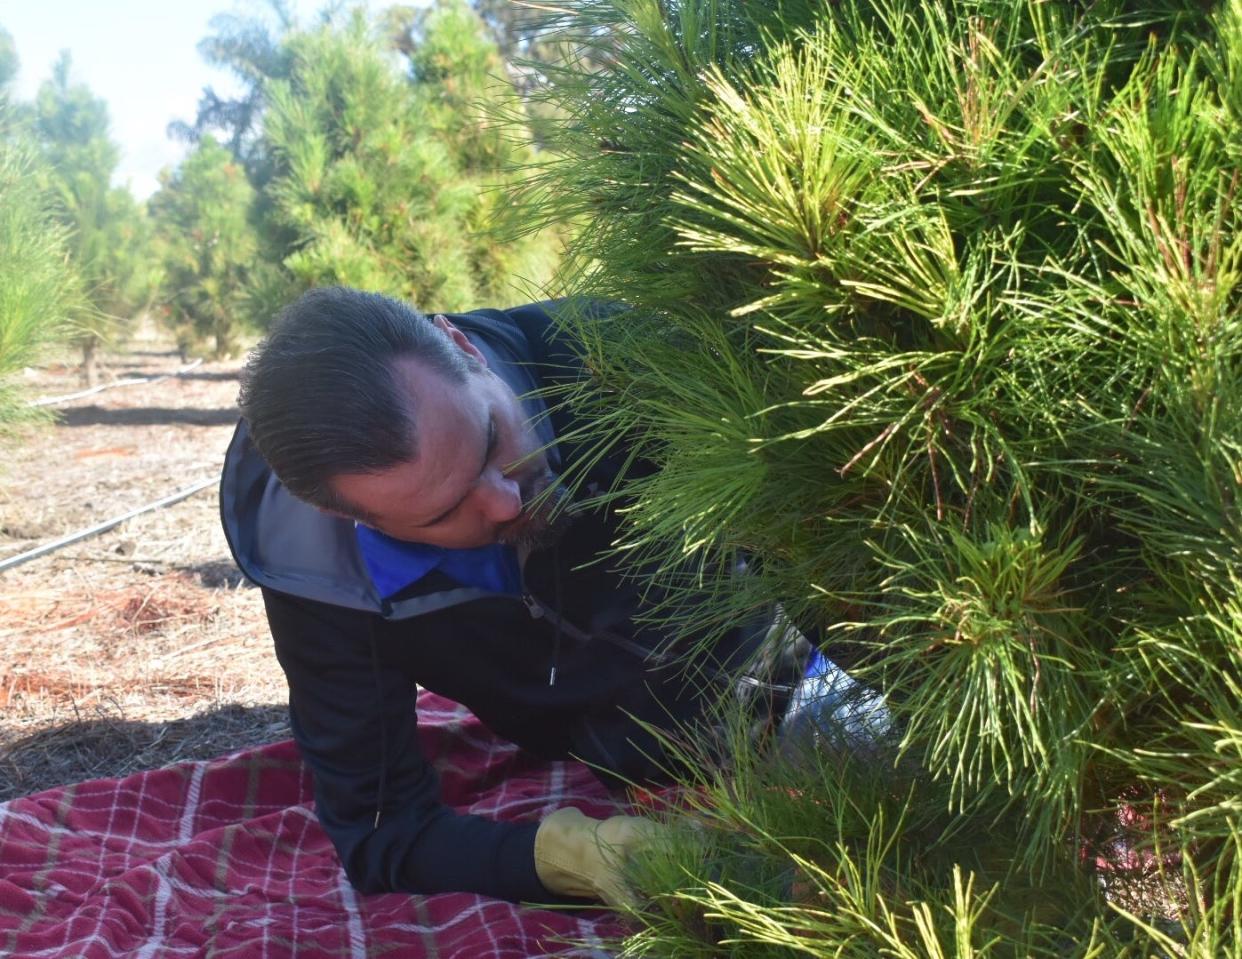 Camarillo resident Peter Christiano fells a Christmas tree in 2019 at Hagle Tree Farm in Somis. Several factors play into the environmental costs of real and artificial holiday trees.